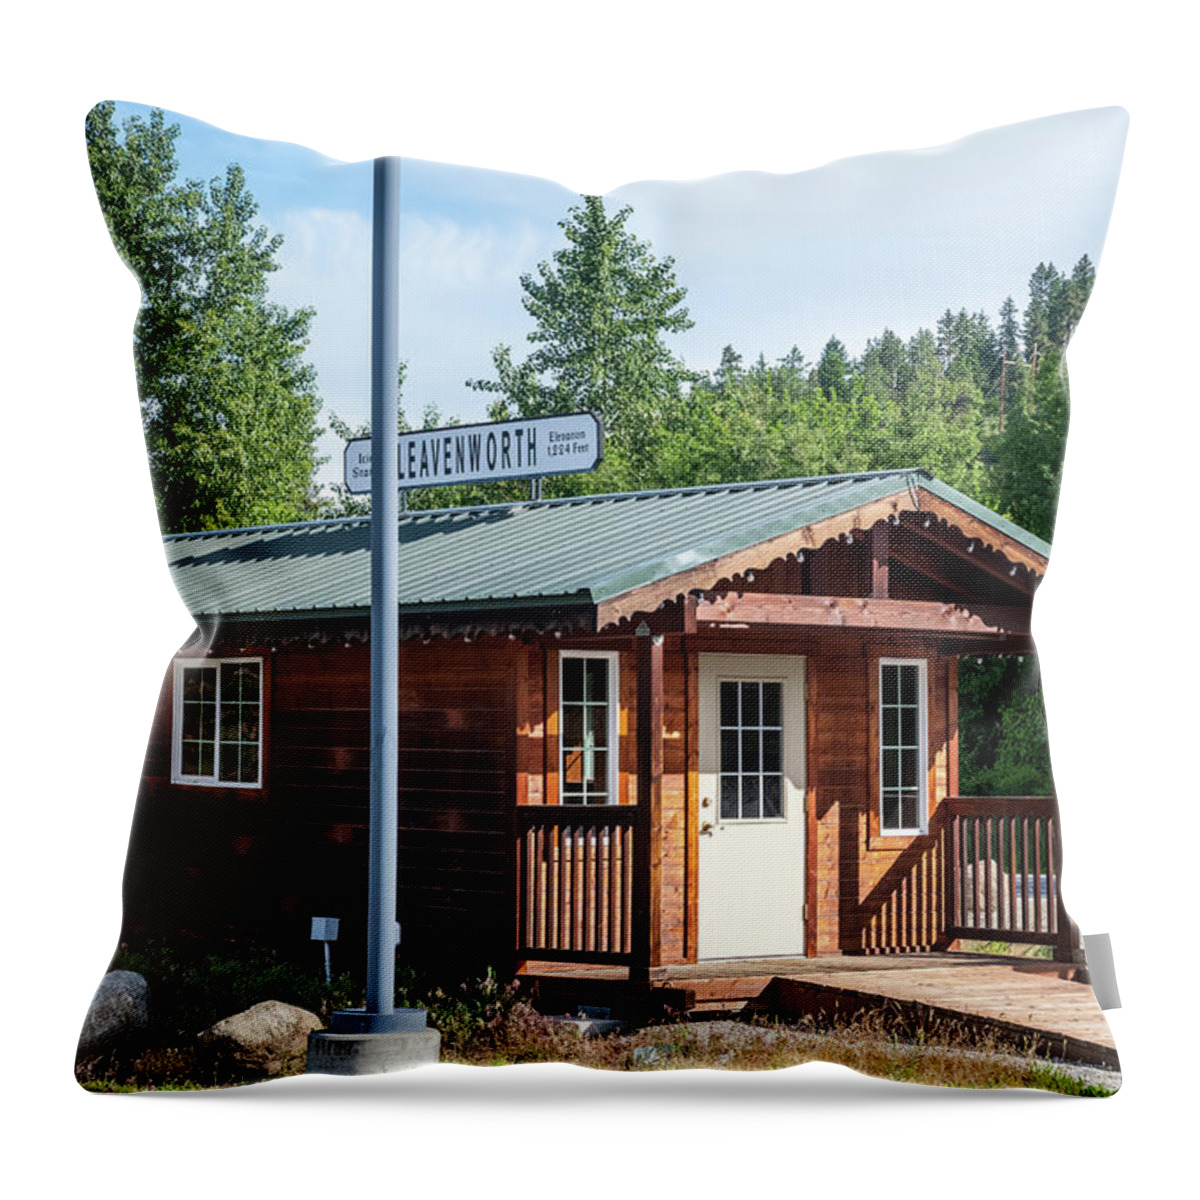 Leavenworth Depot Throw Pillow featuring the photograph Leavenworth Depot by Tom Cochran